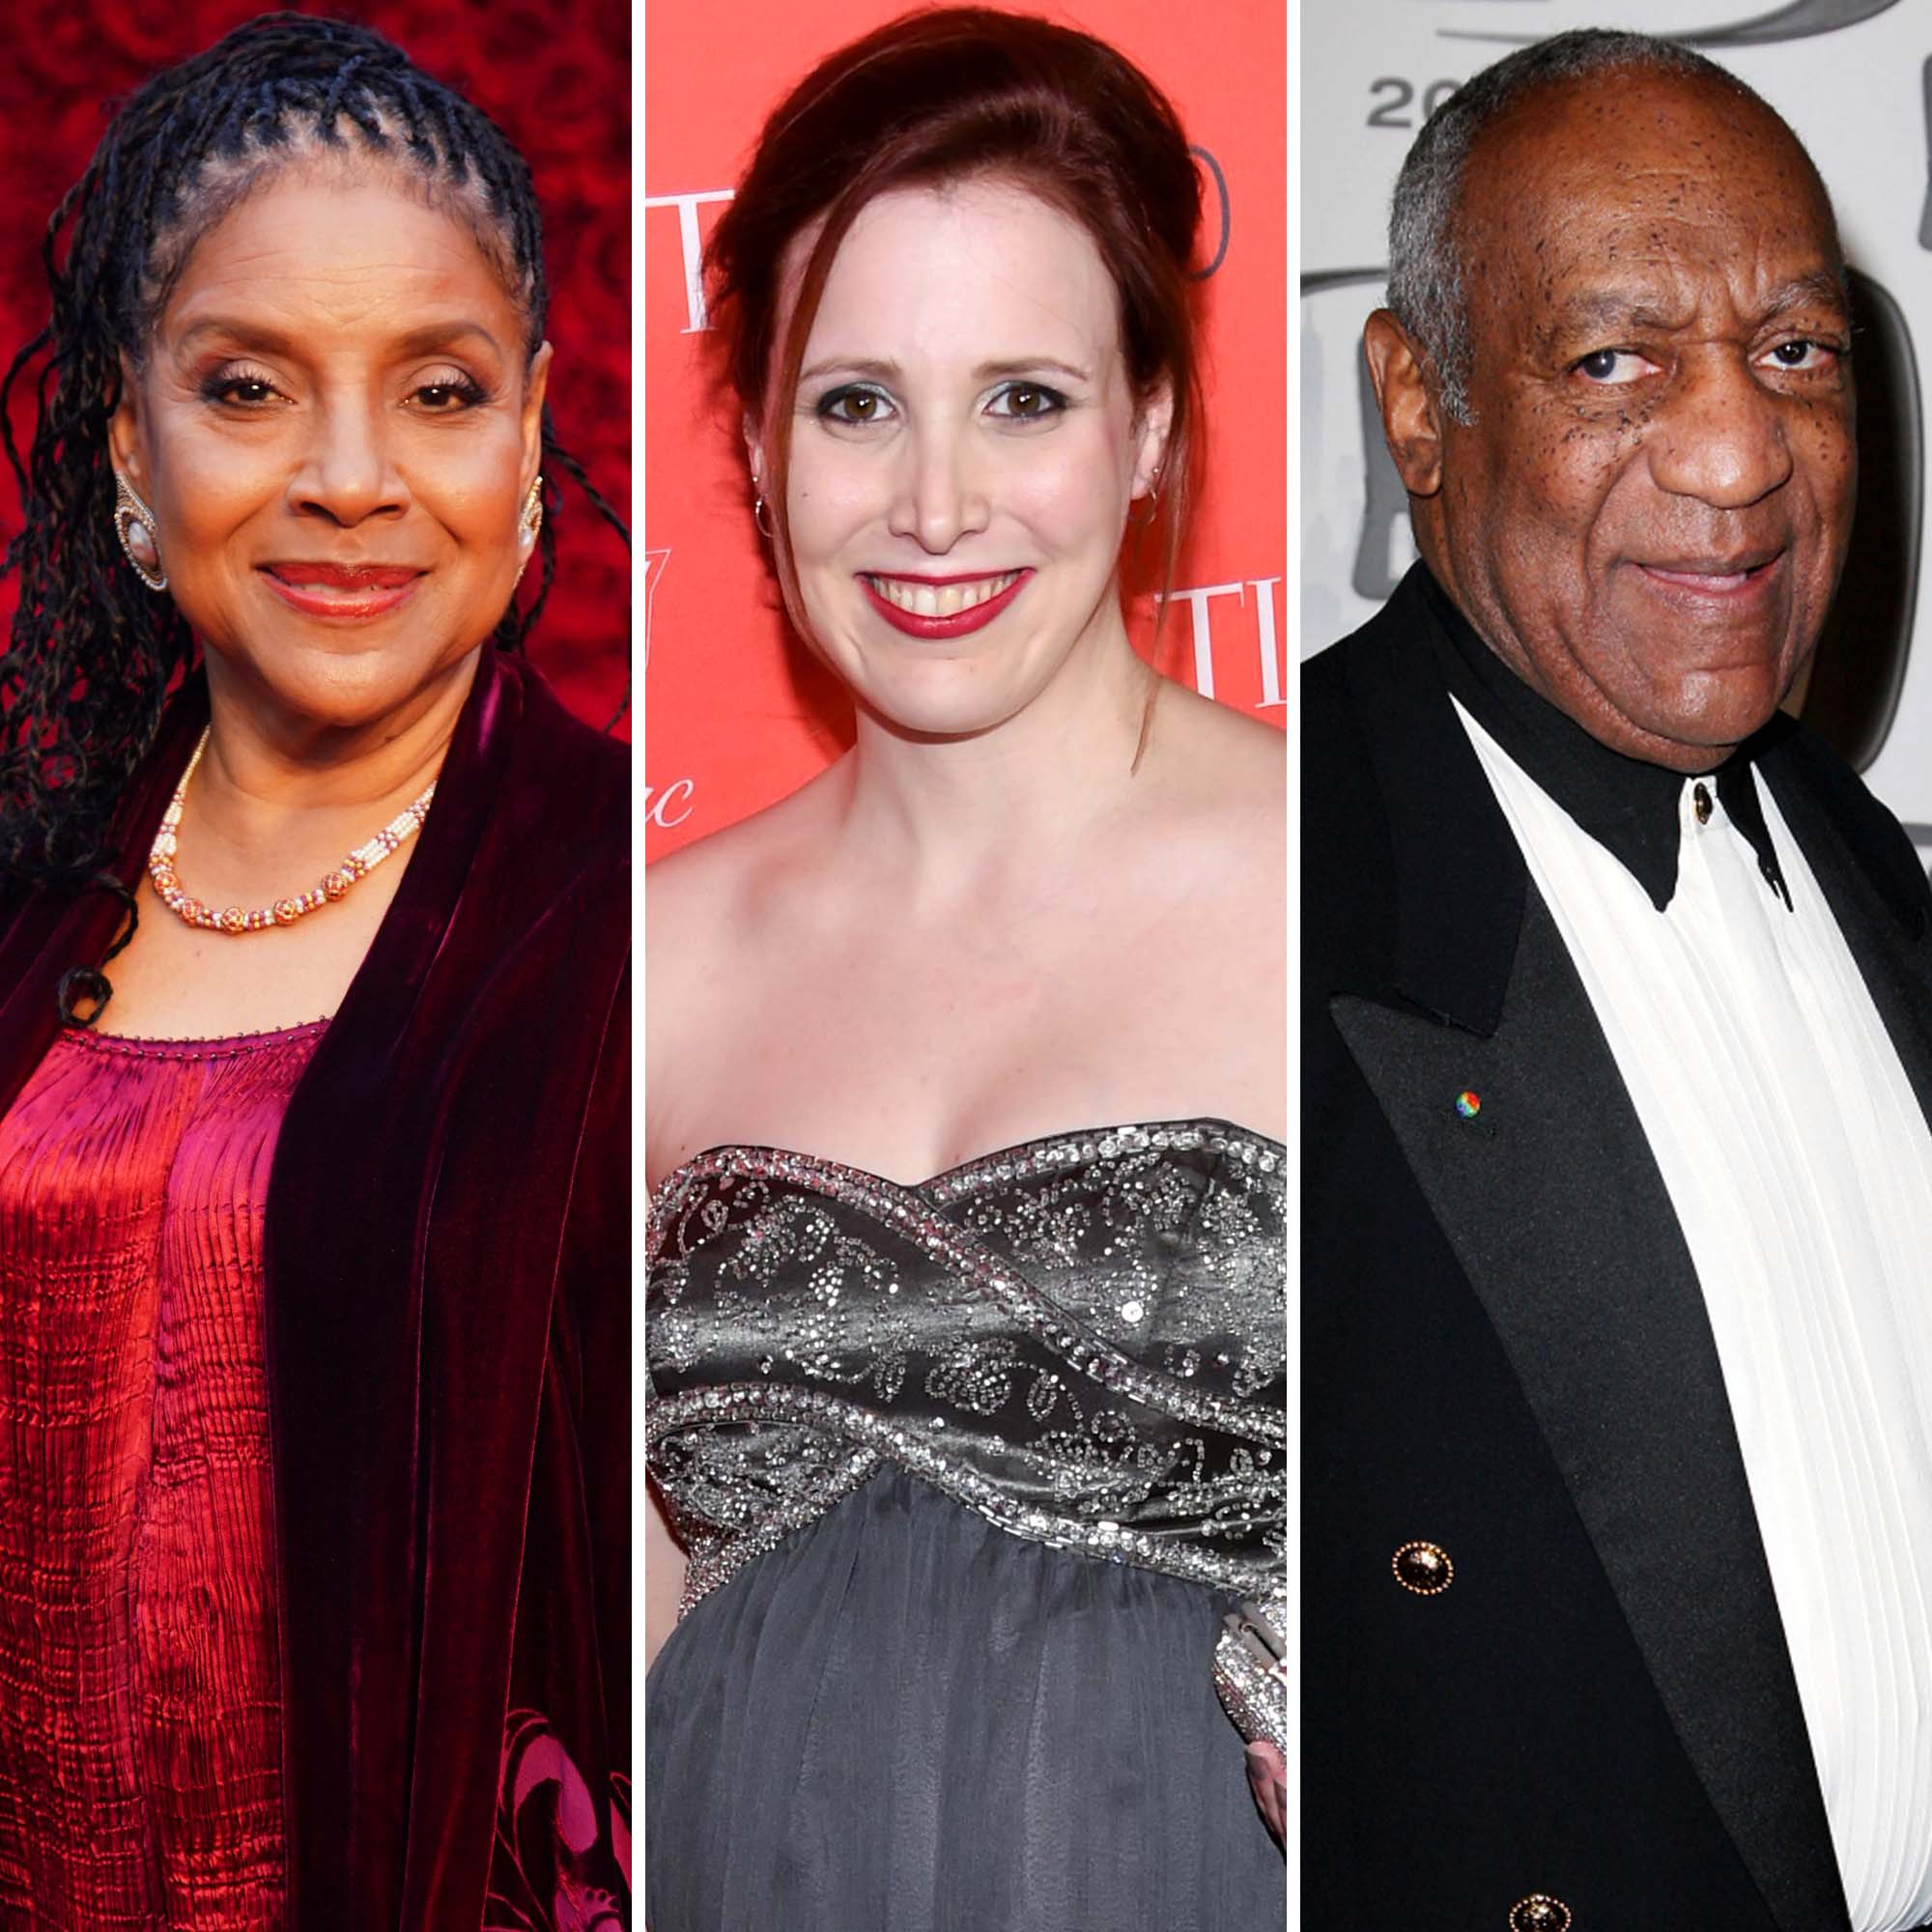 Phylicia Rashad Raises Eyebrows With Response to Bill Cosby's Release